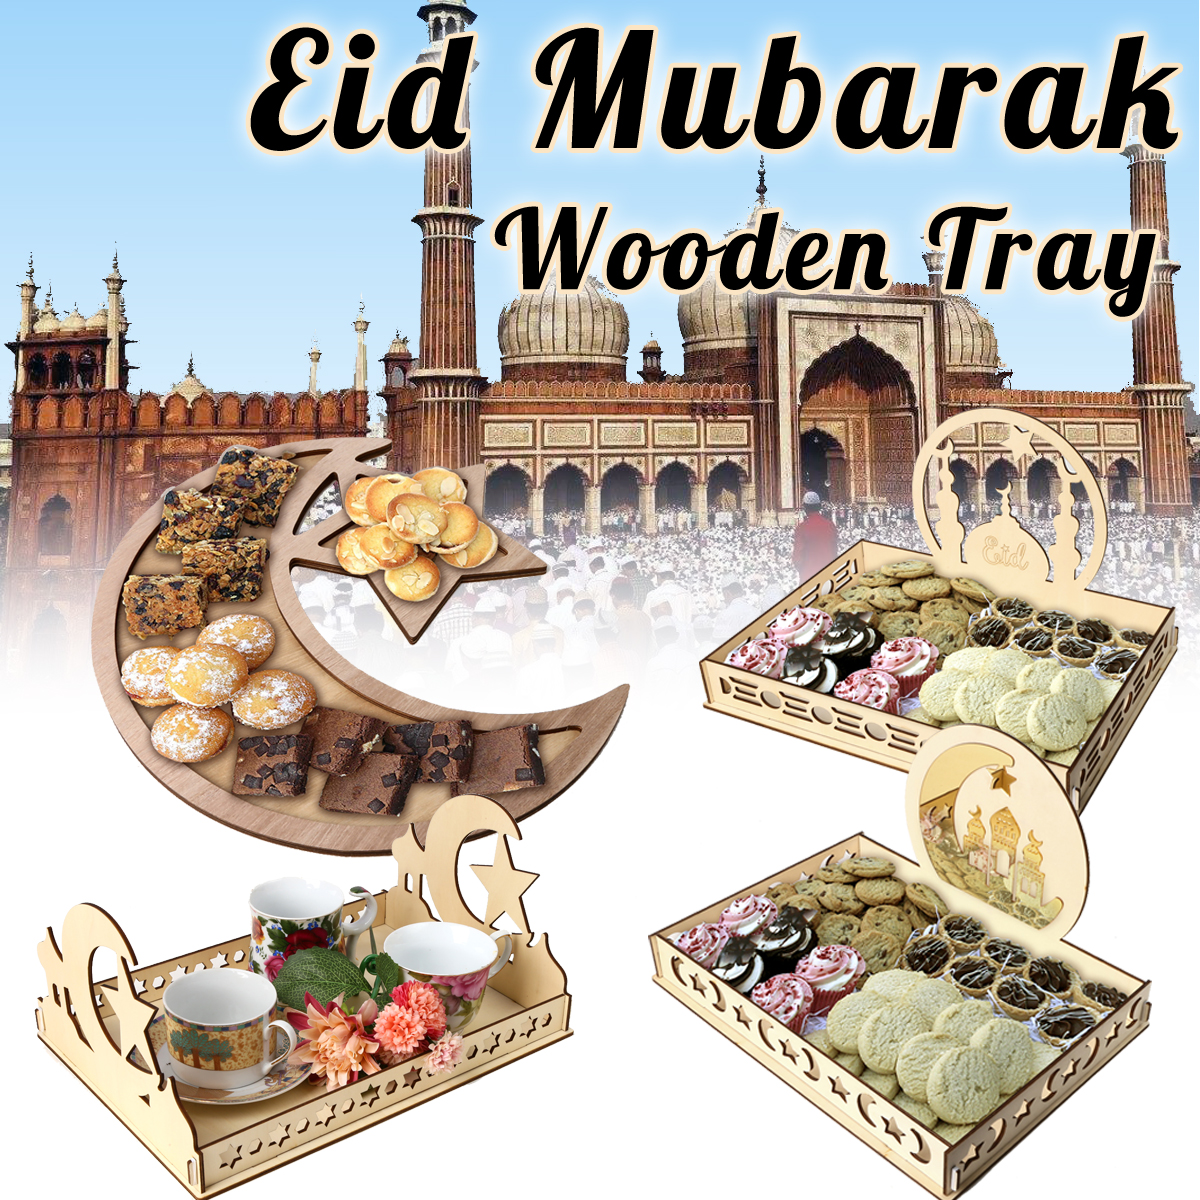 Rustic-Wooden-Islam-Ramadan-Food-Serving-Tray-Pastry-Dinner-Plates-Holder-Decorations-1453425-1